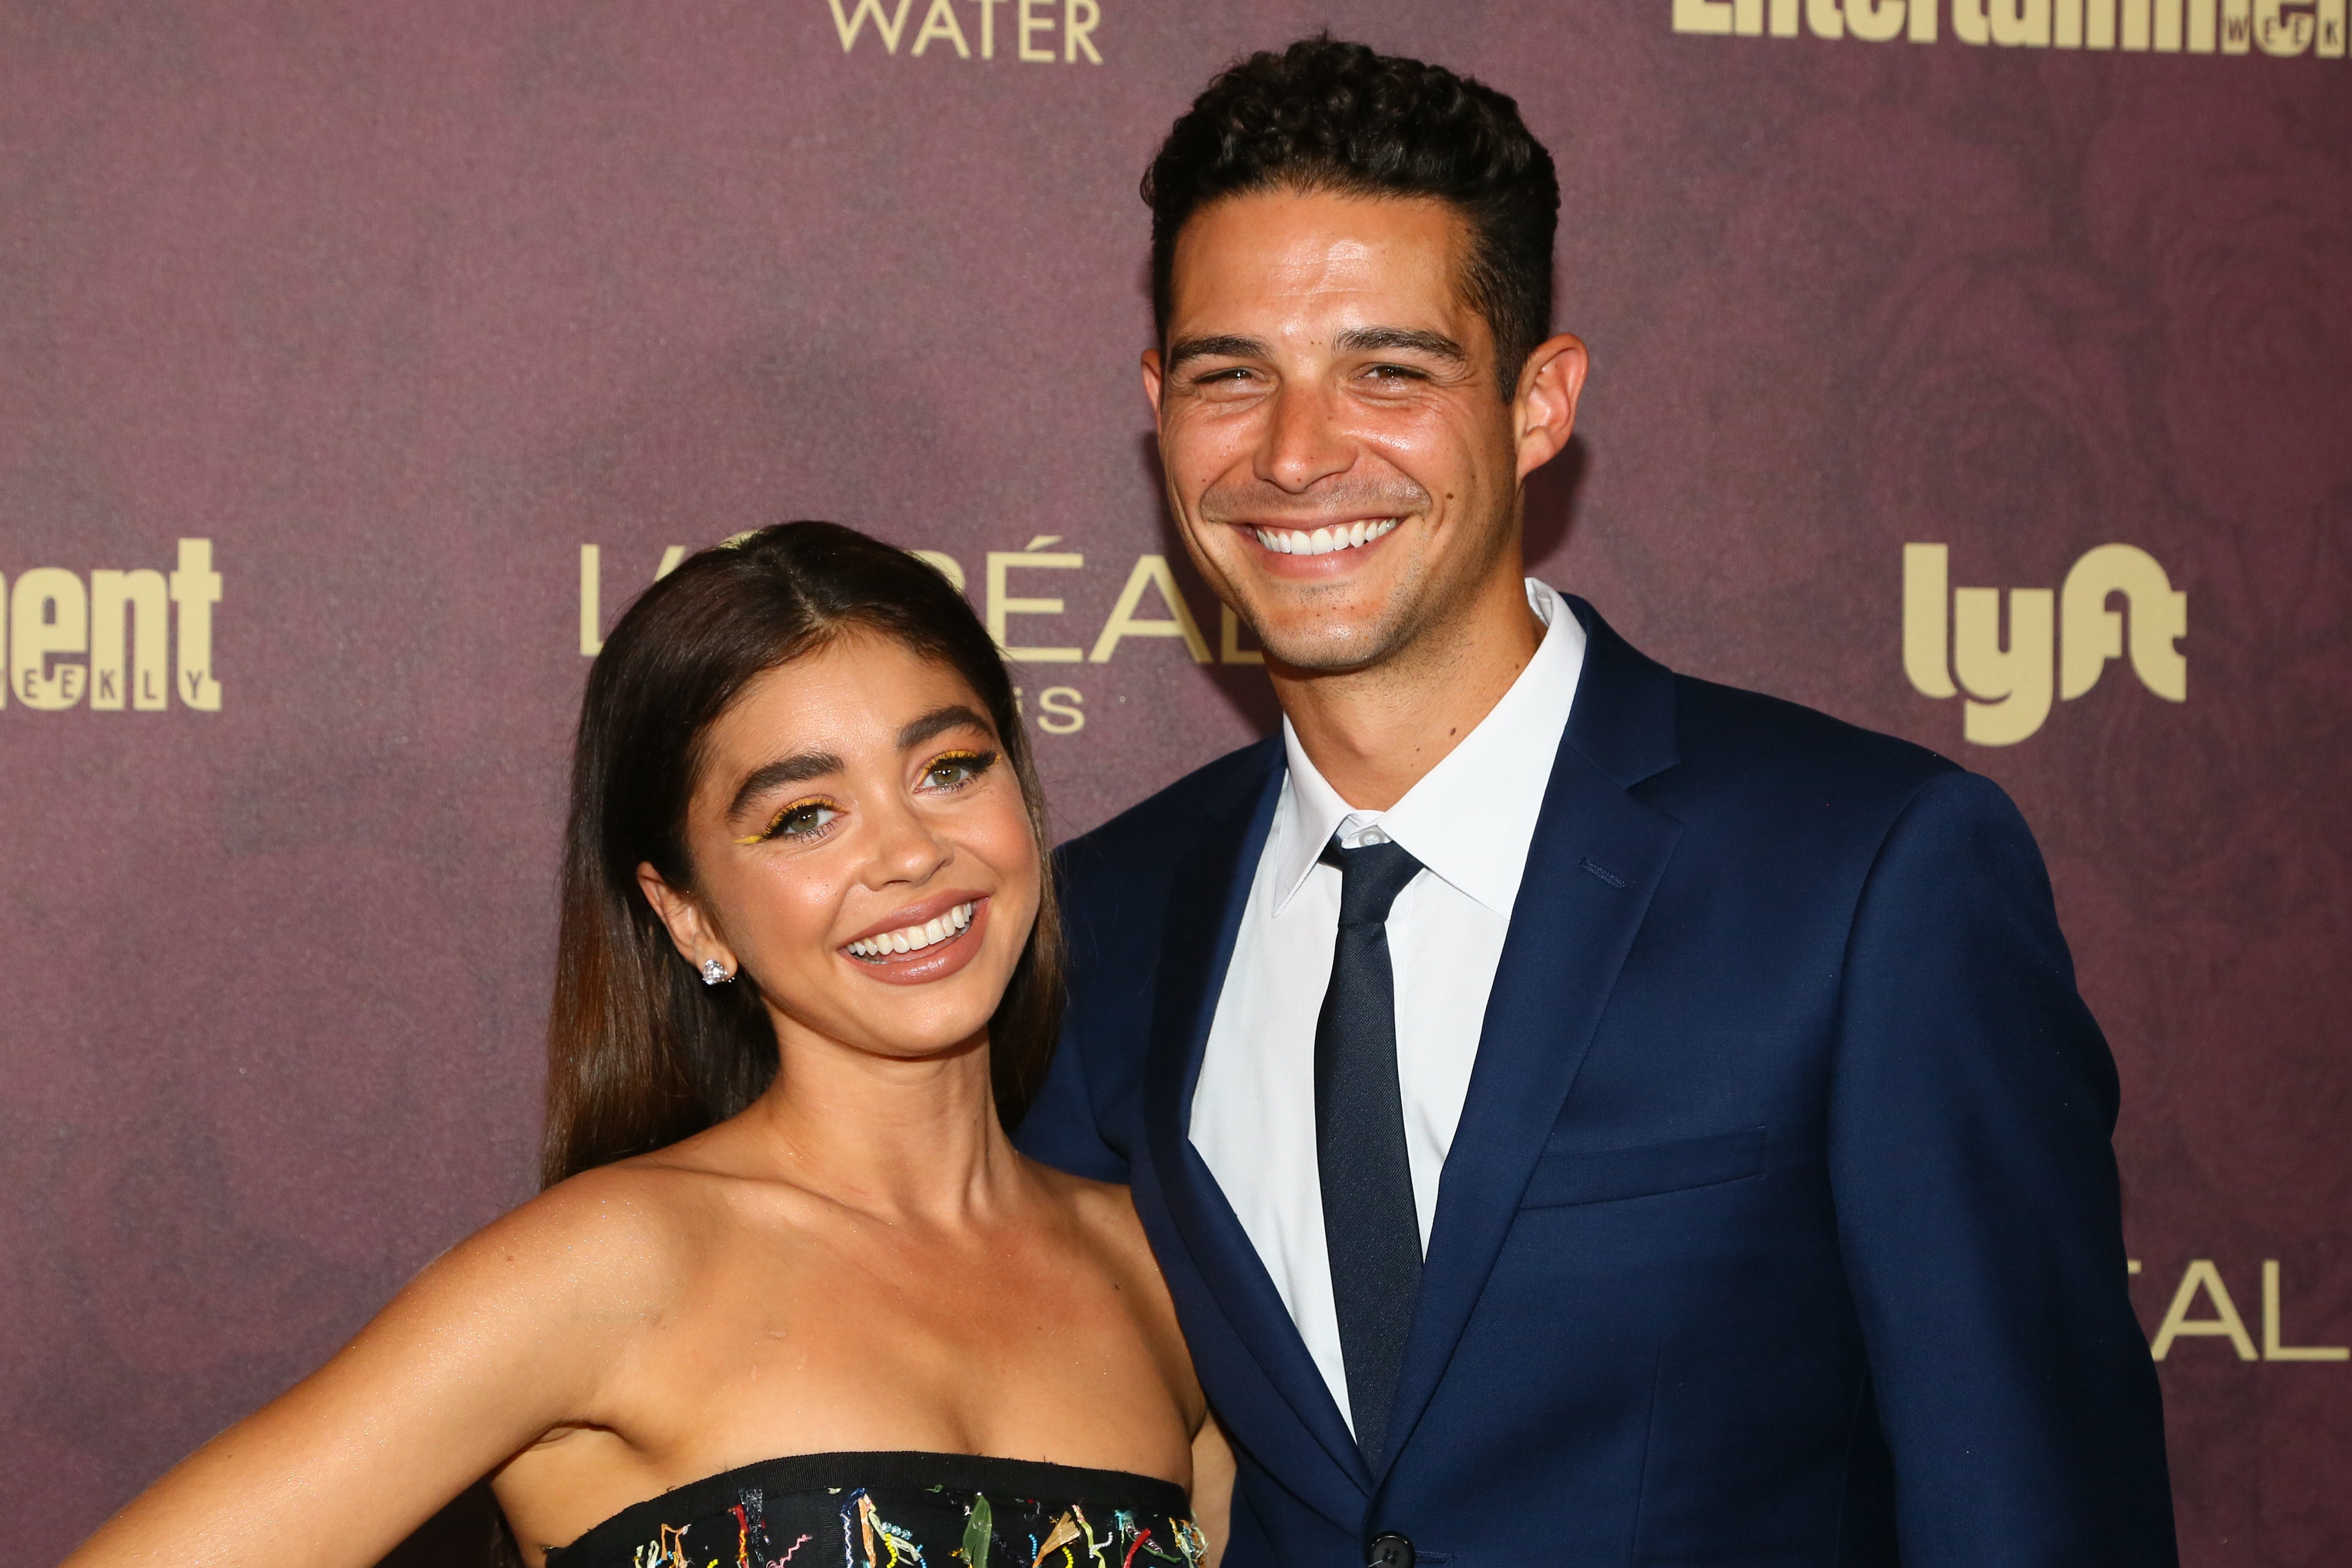 Sarah Hyland (L) and Wells Adams arrive to the 2018 Entertainment Weekly Pre-Emmy Party at Sunset Tower Hotel on September 15, 2018, in West Hollywood, California. | Source: Getty Images.